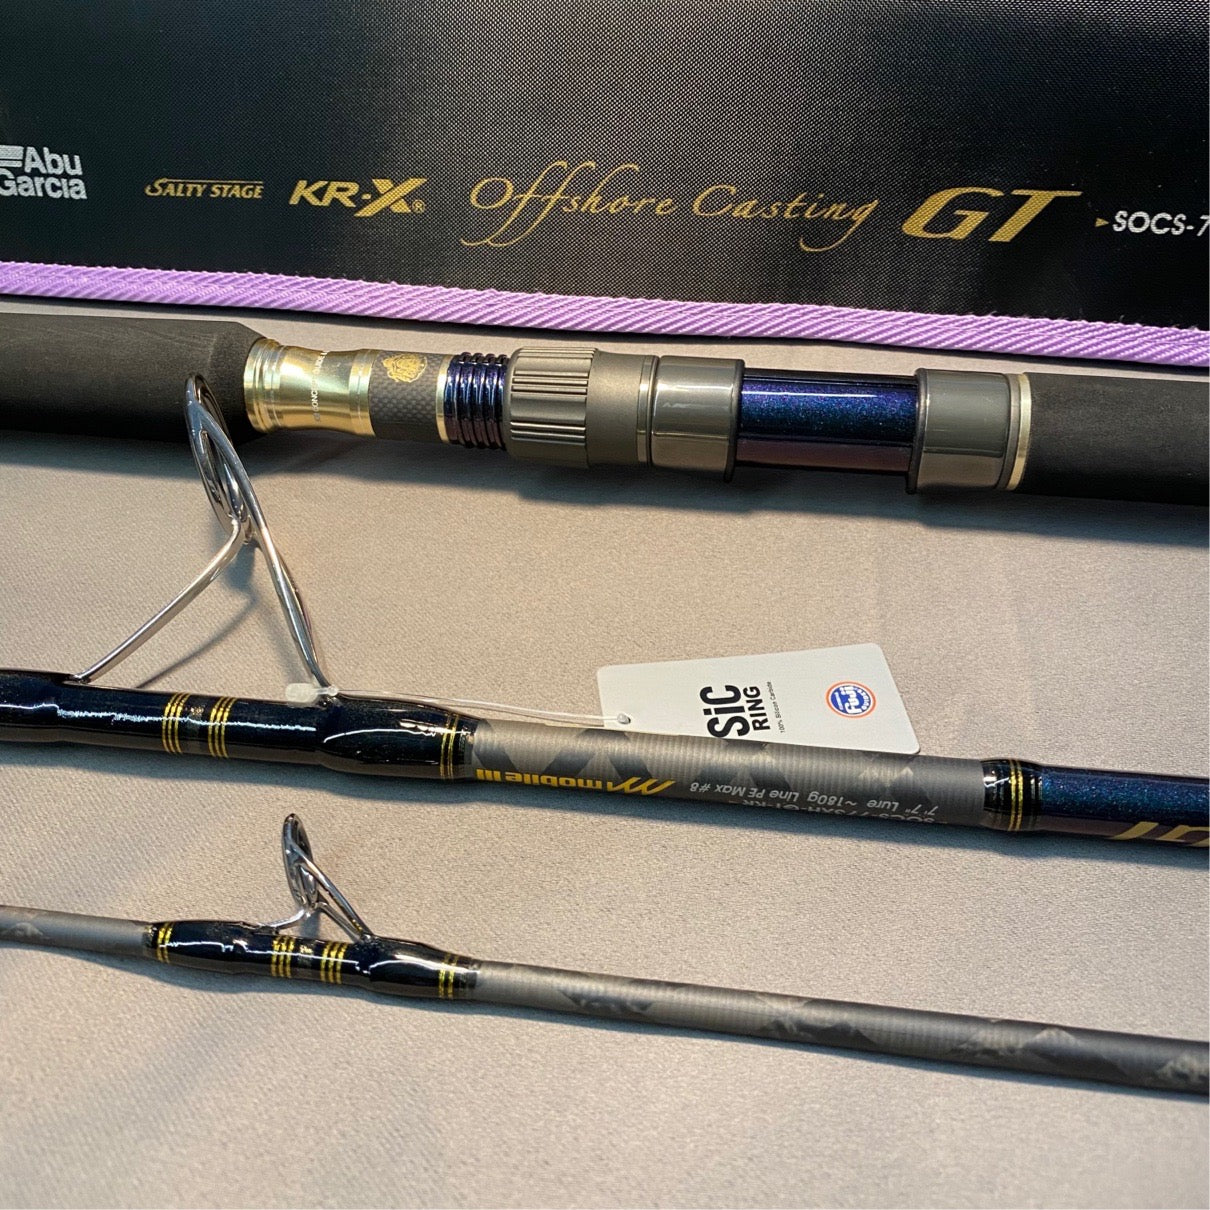 ABU GARCIA- Offshore casting GT- Travel rods -3 pieces – Fight